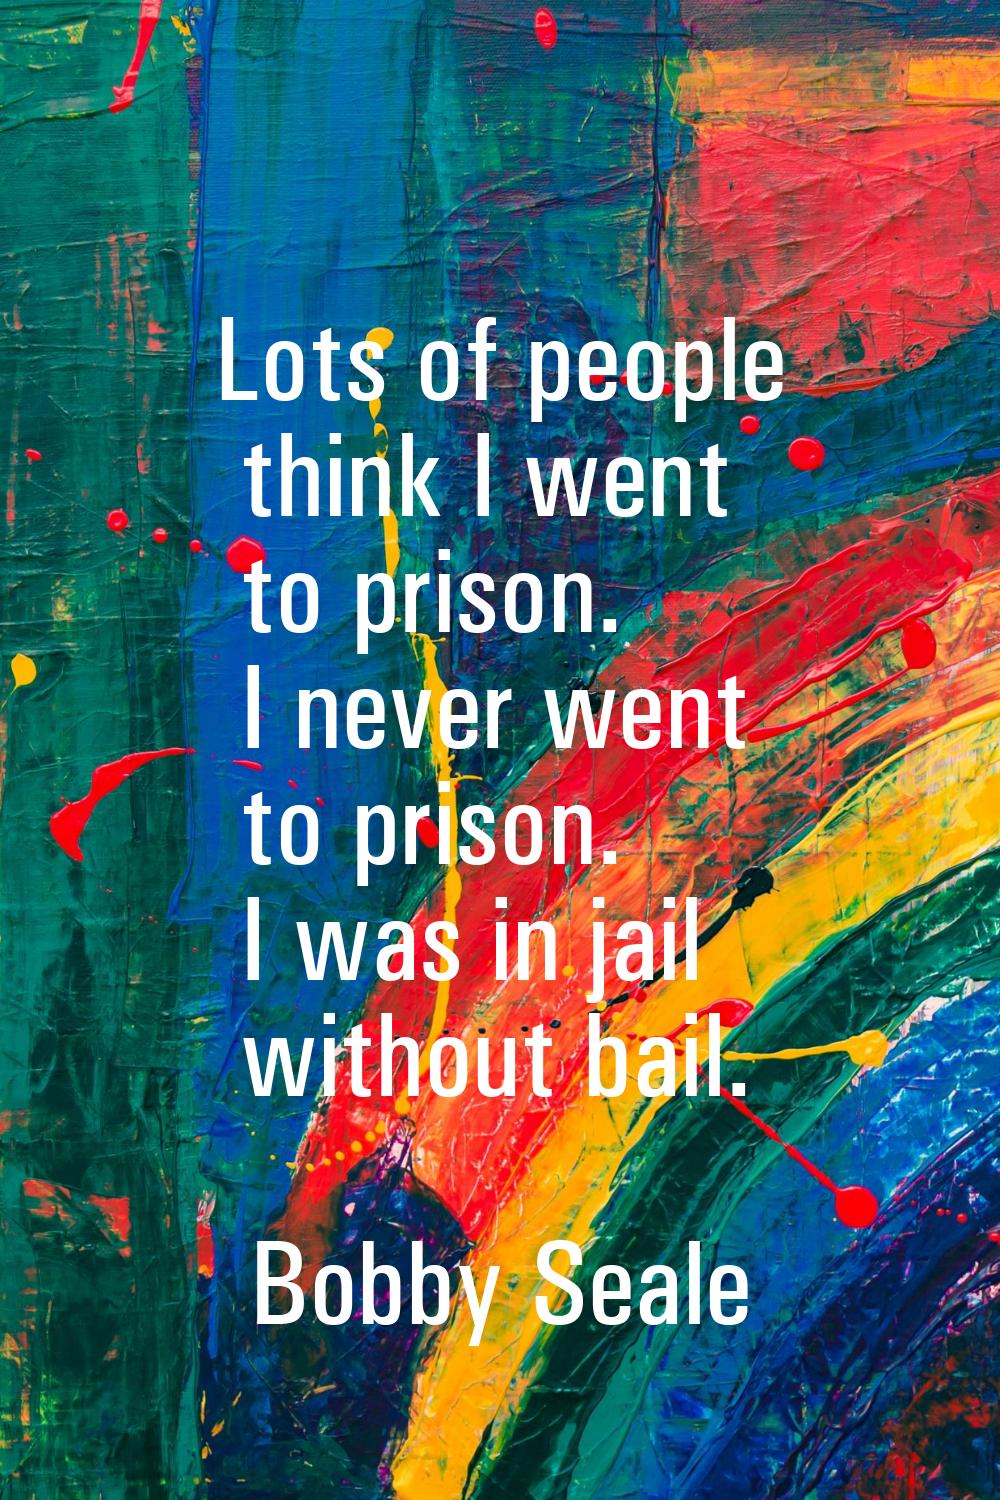 Lots of people think I went to prison. I never went to prison. I was in jail without bail.